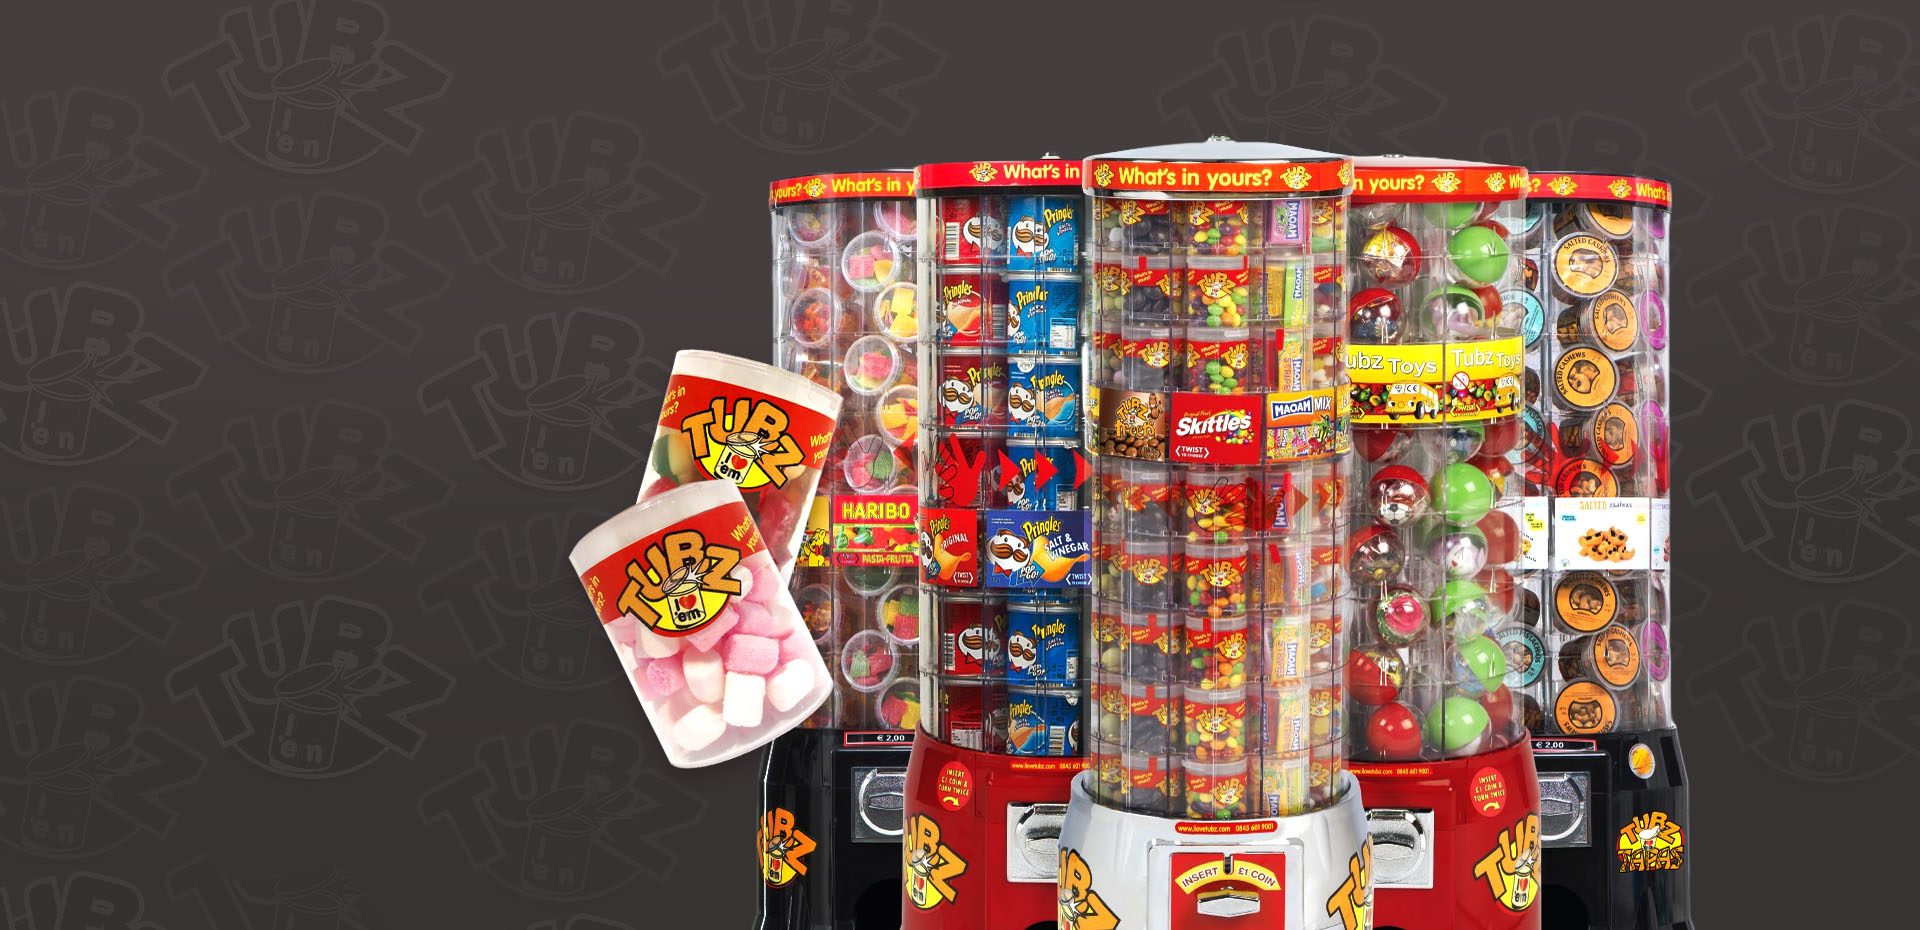 Installers Of Sweets Vending Machines For Soft Play Establishments Stamford